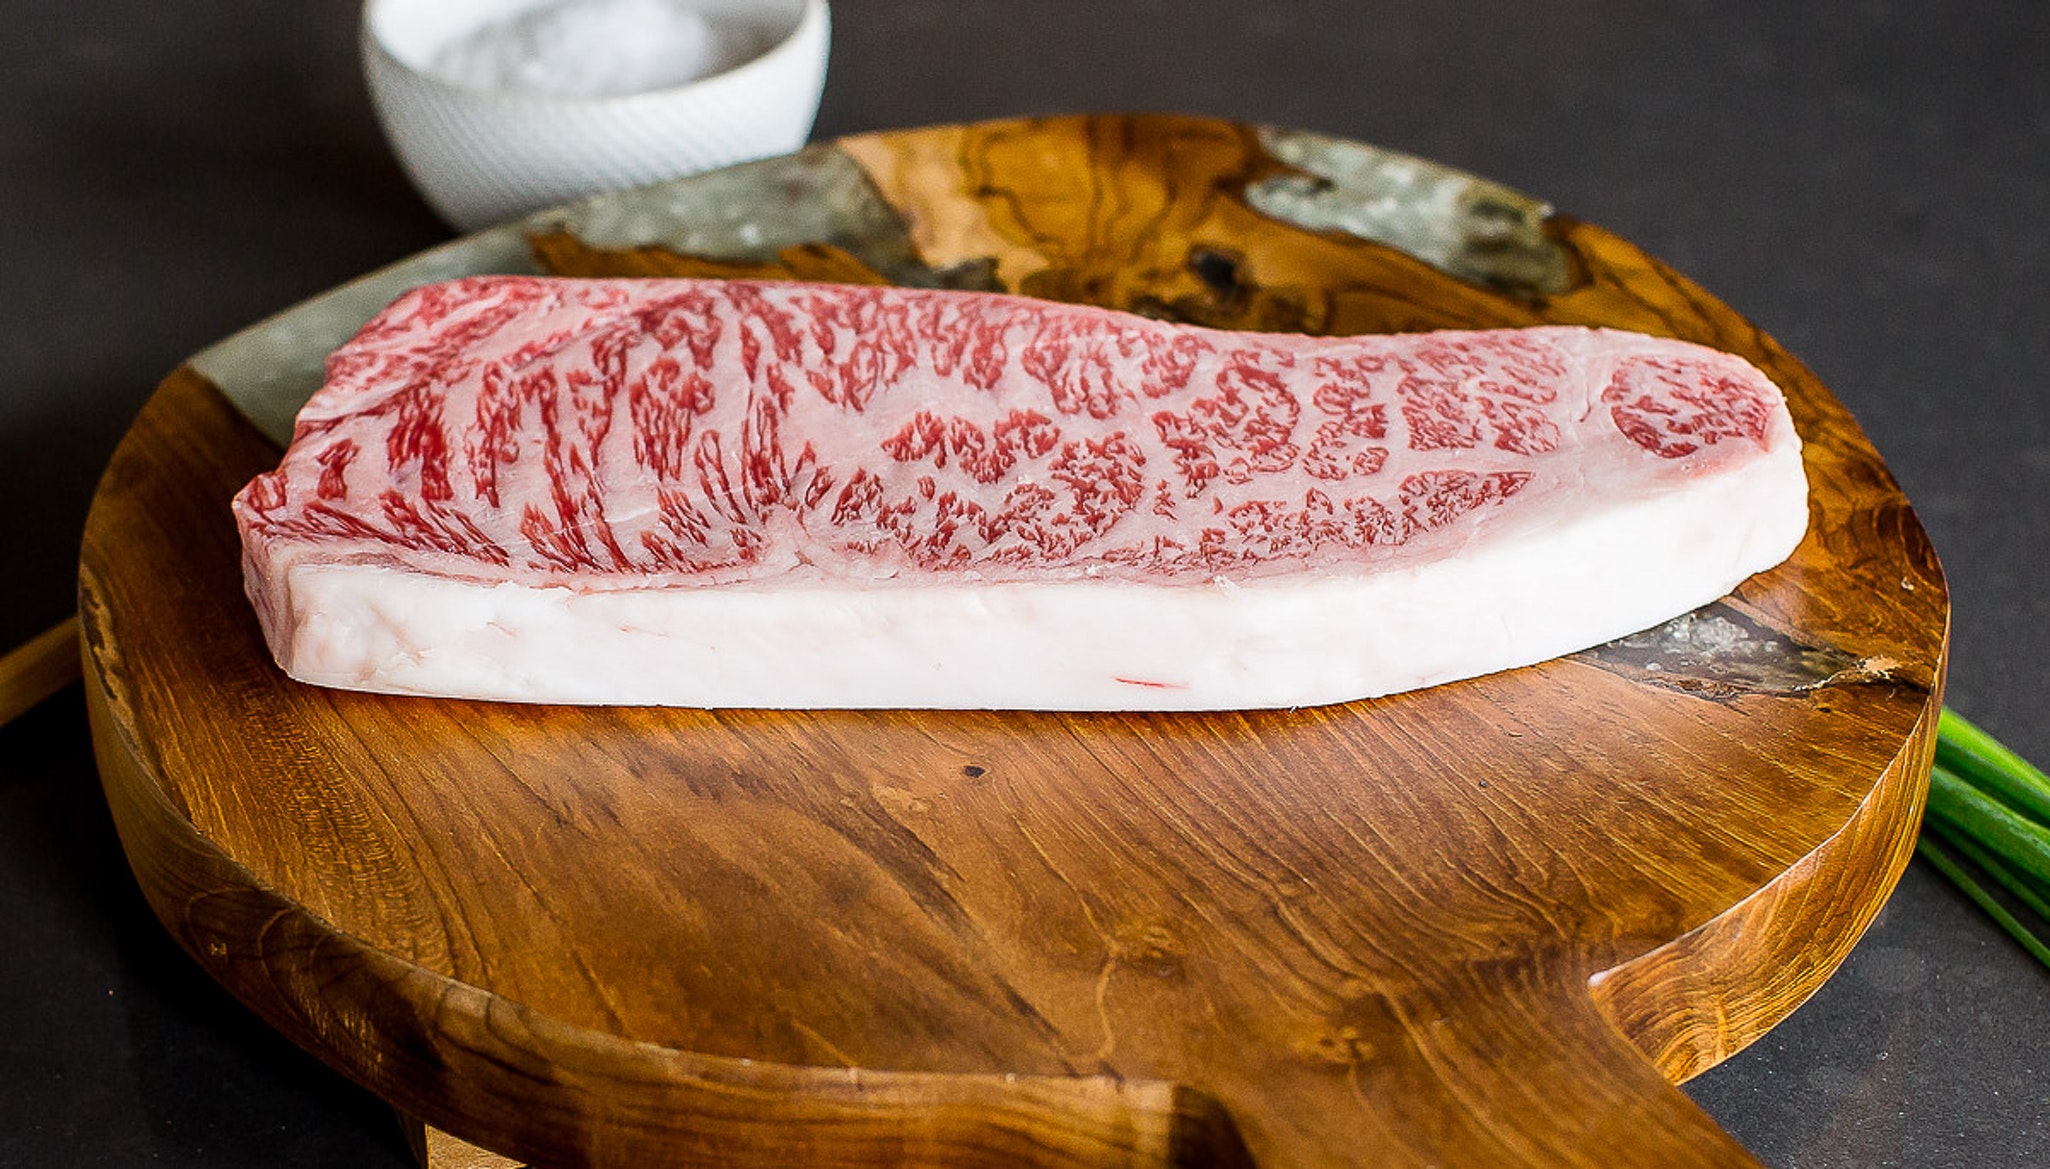 Crowd Cow is the leading purveyor of both Japanese A5 Wagyu from Japan as well as domestic Wagyu